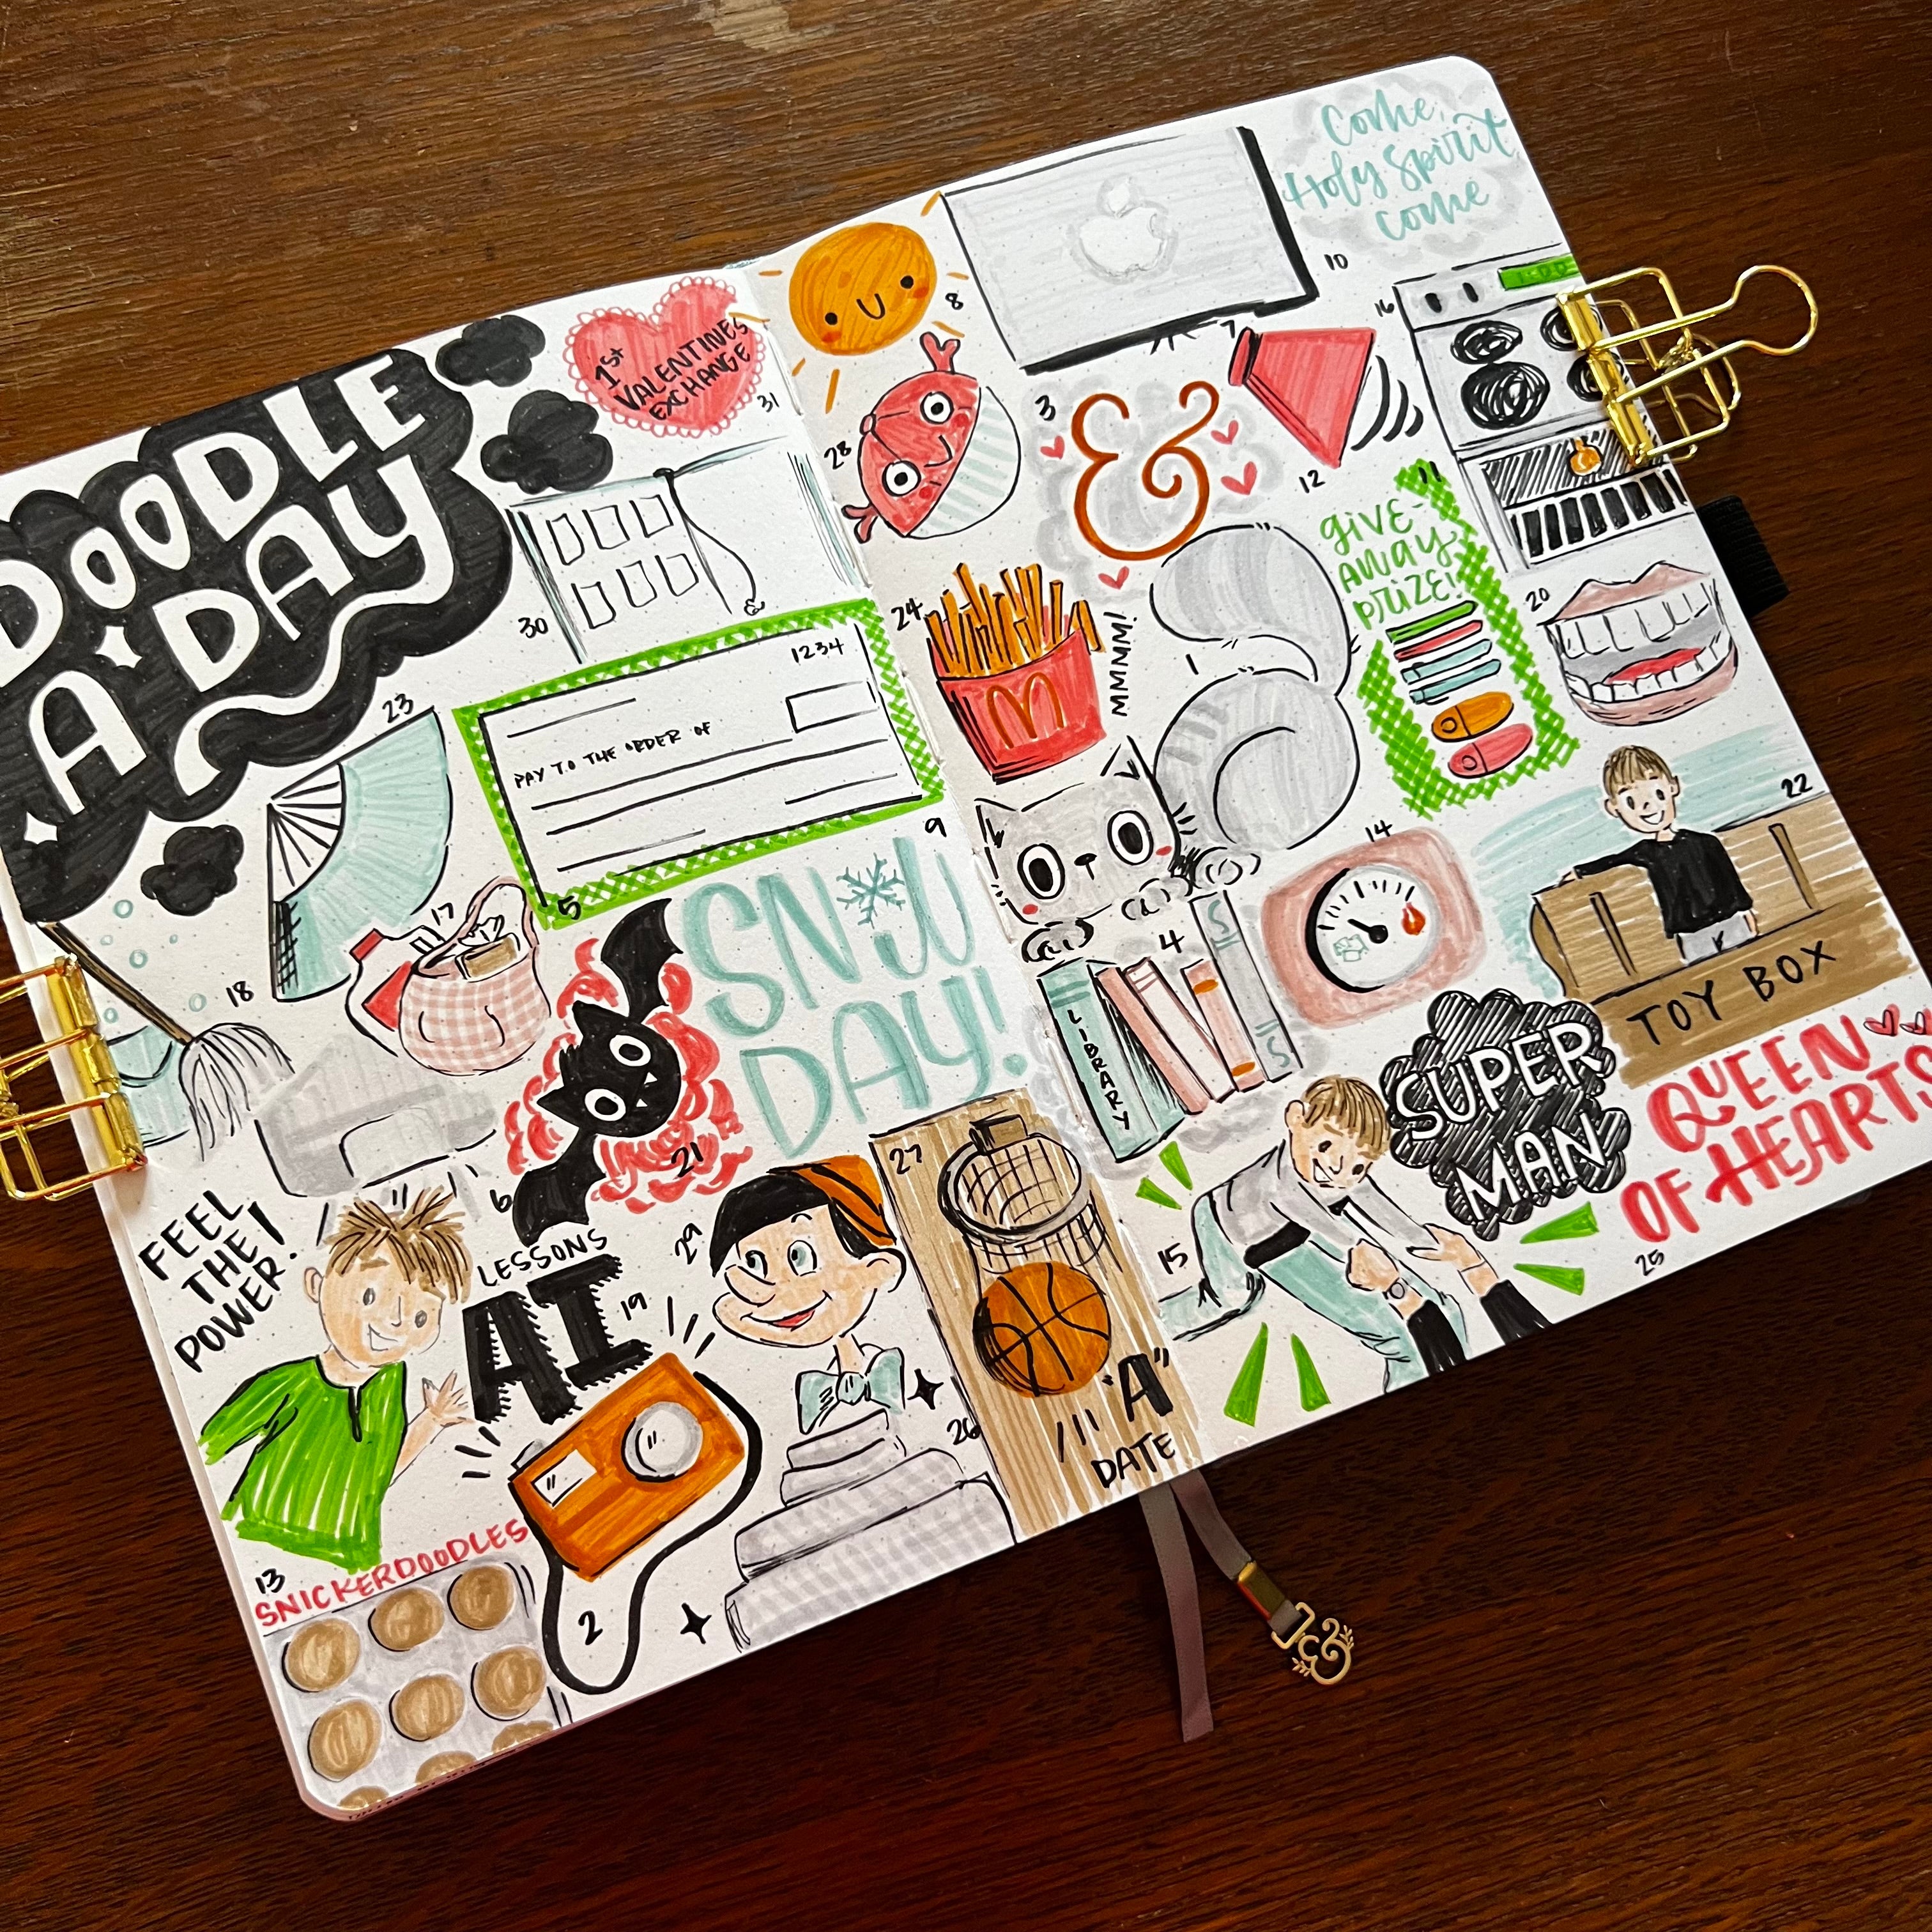 Open notebook with completed Doodle A Day collage style spread.